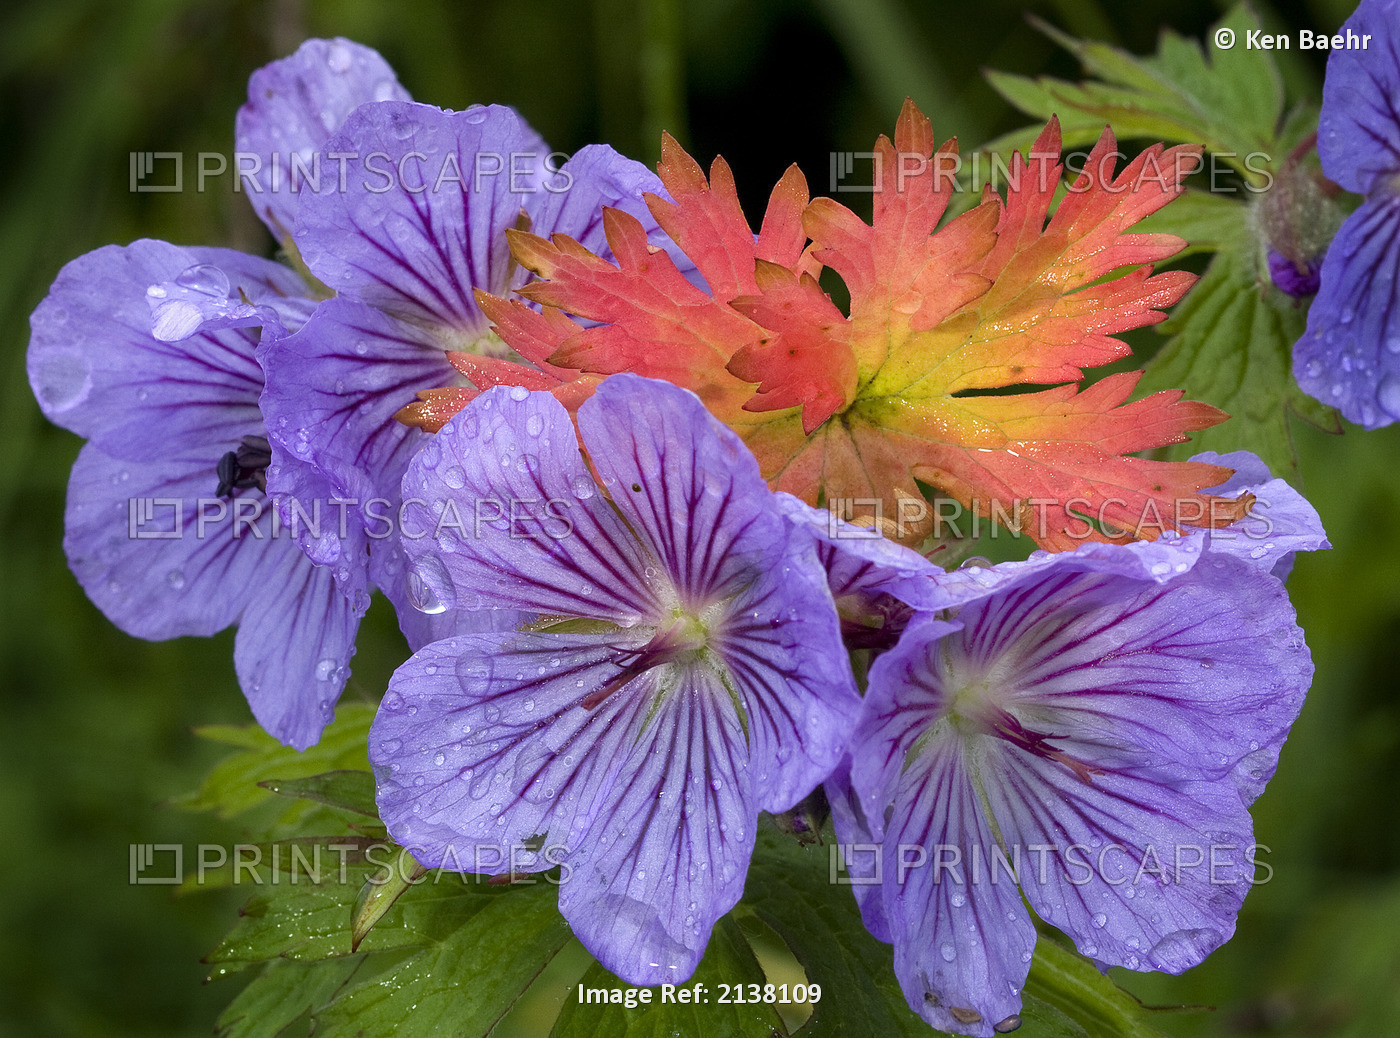 Wild Geranium Blooms With Premature Fall Leaf Coloring In Glen Alps, Chugach ...